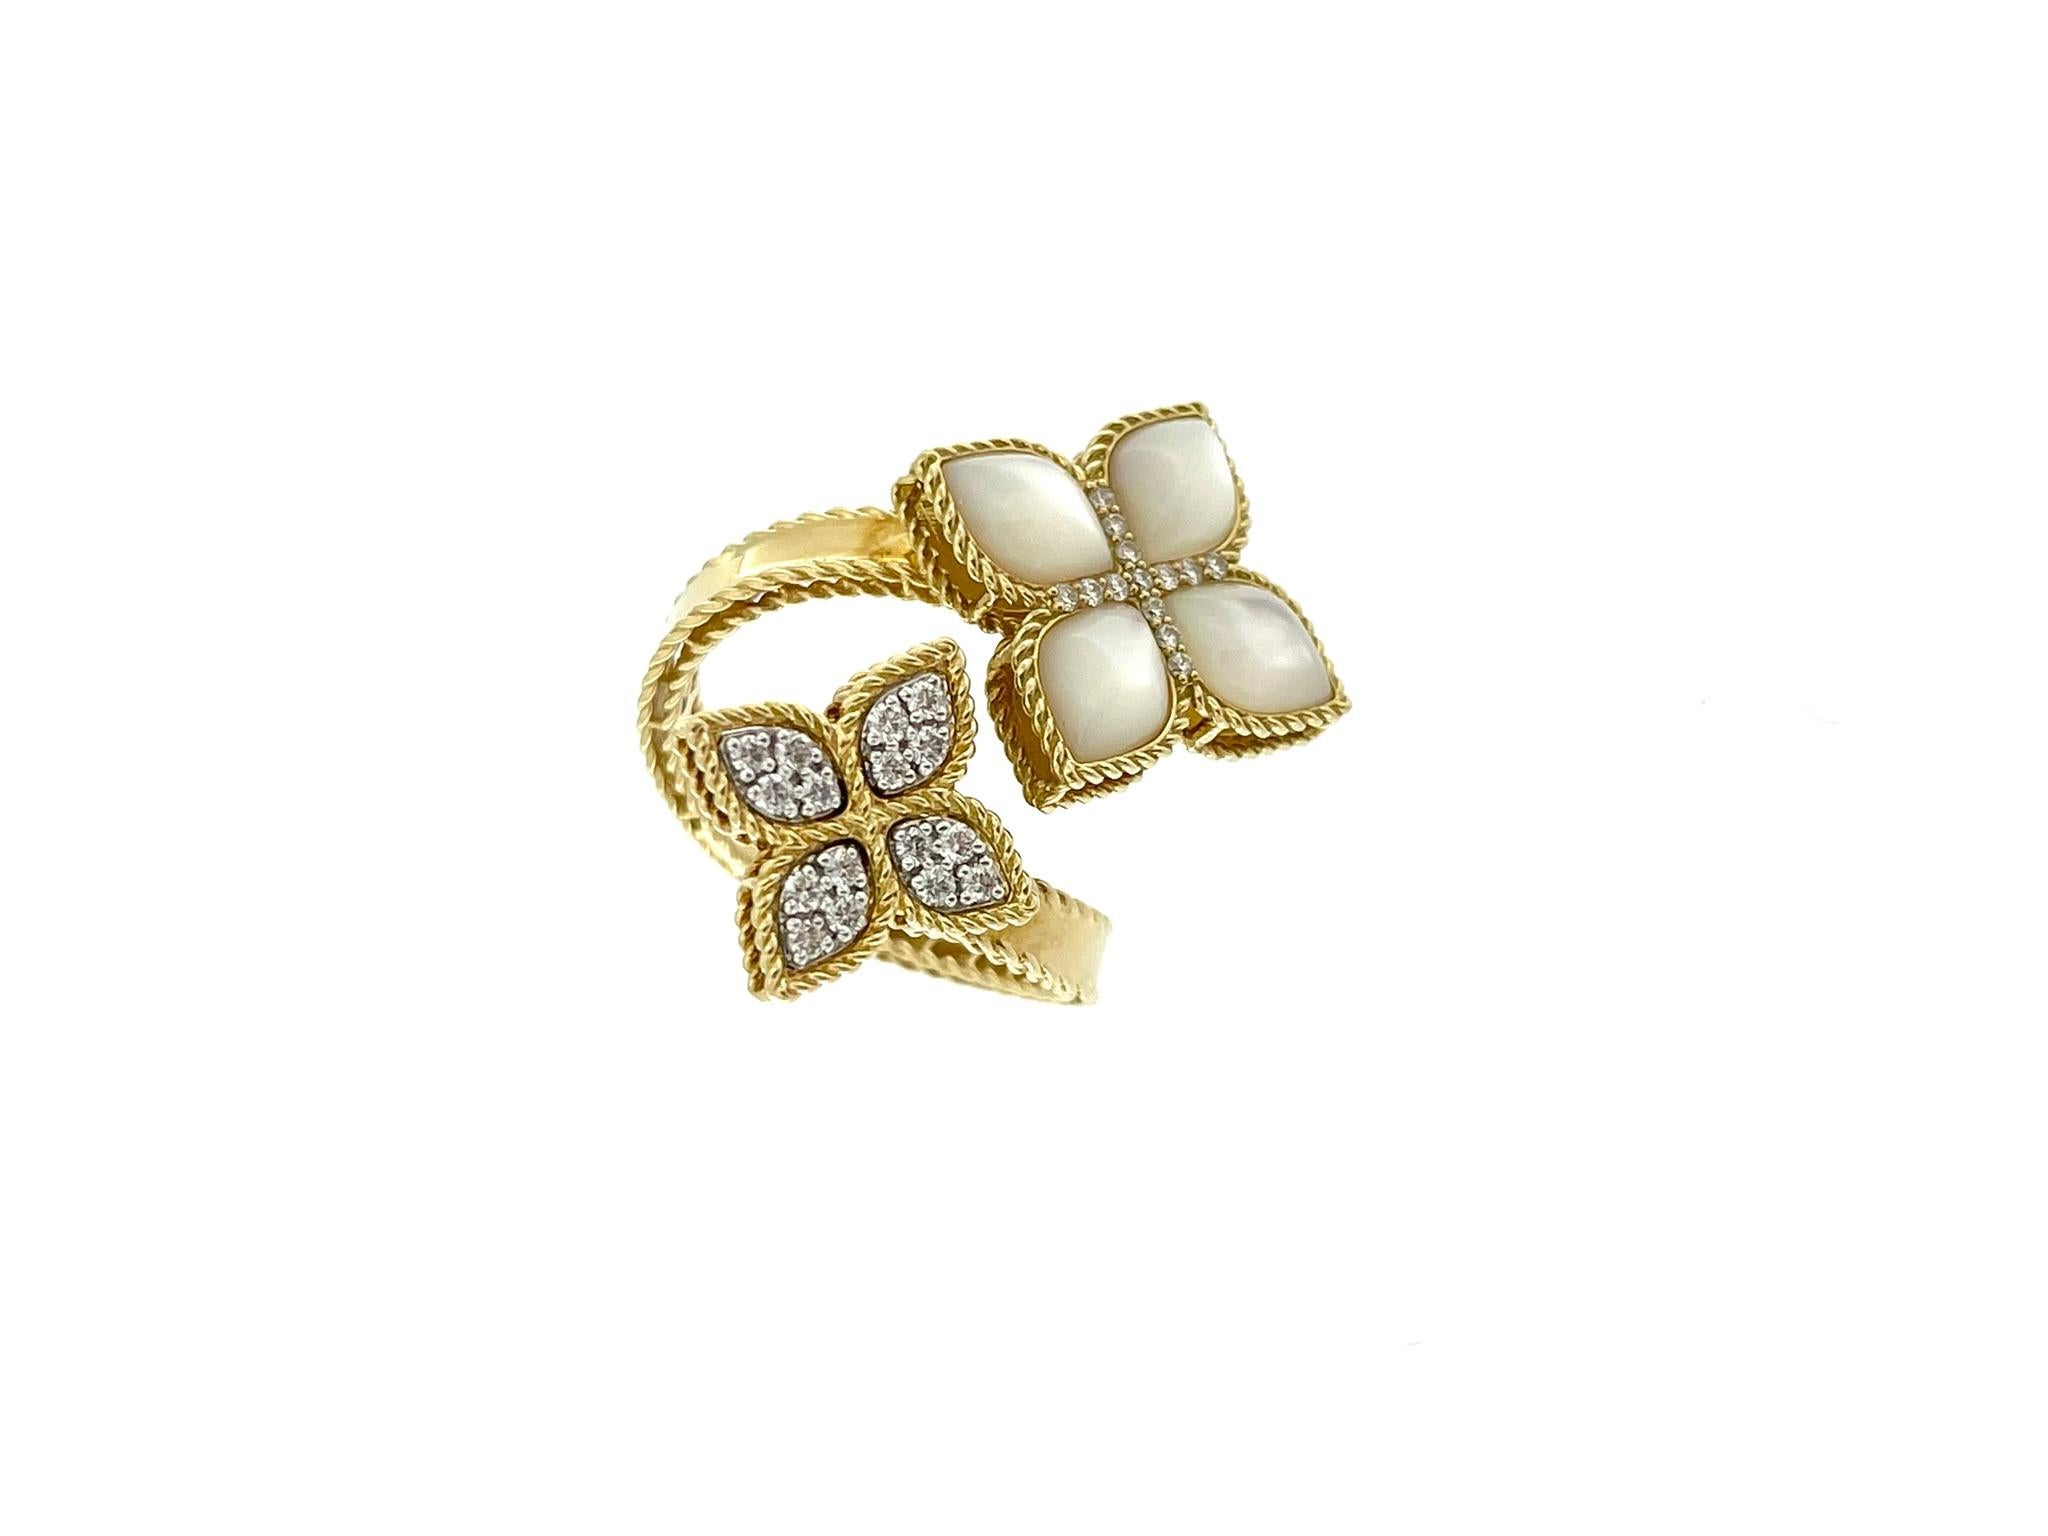 The Roberto Coin Venetian Princess Mother of Pearl and Diamonds Bypass Ring is a luxurious and enchanting piece of jewelry that combines exquisite craftsmanship with elegant design. This bypass ring features two central elements crafted with Mother